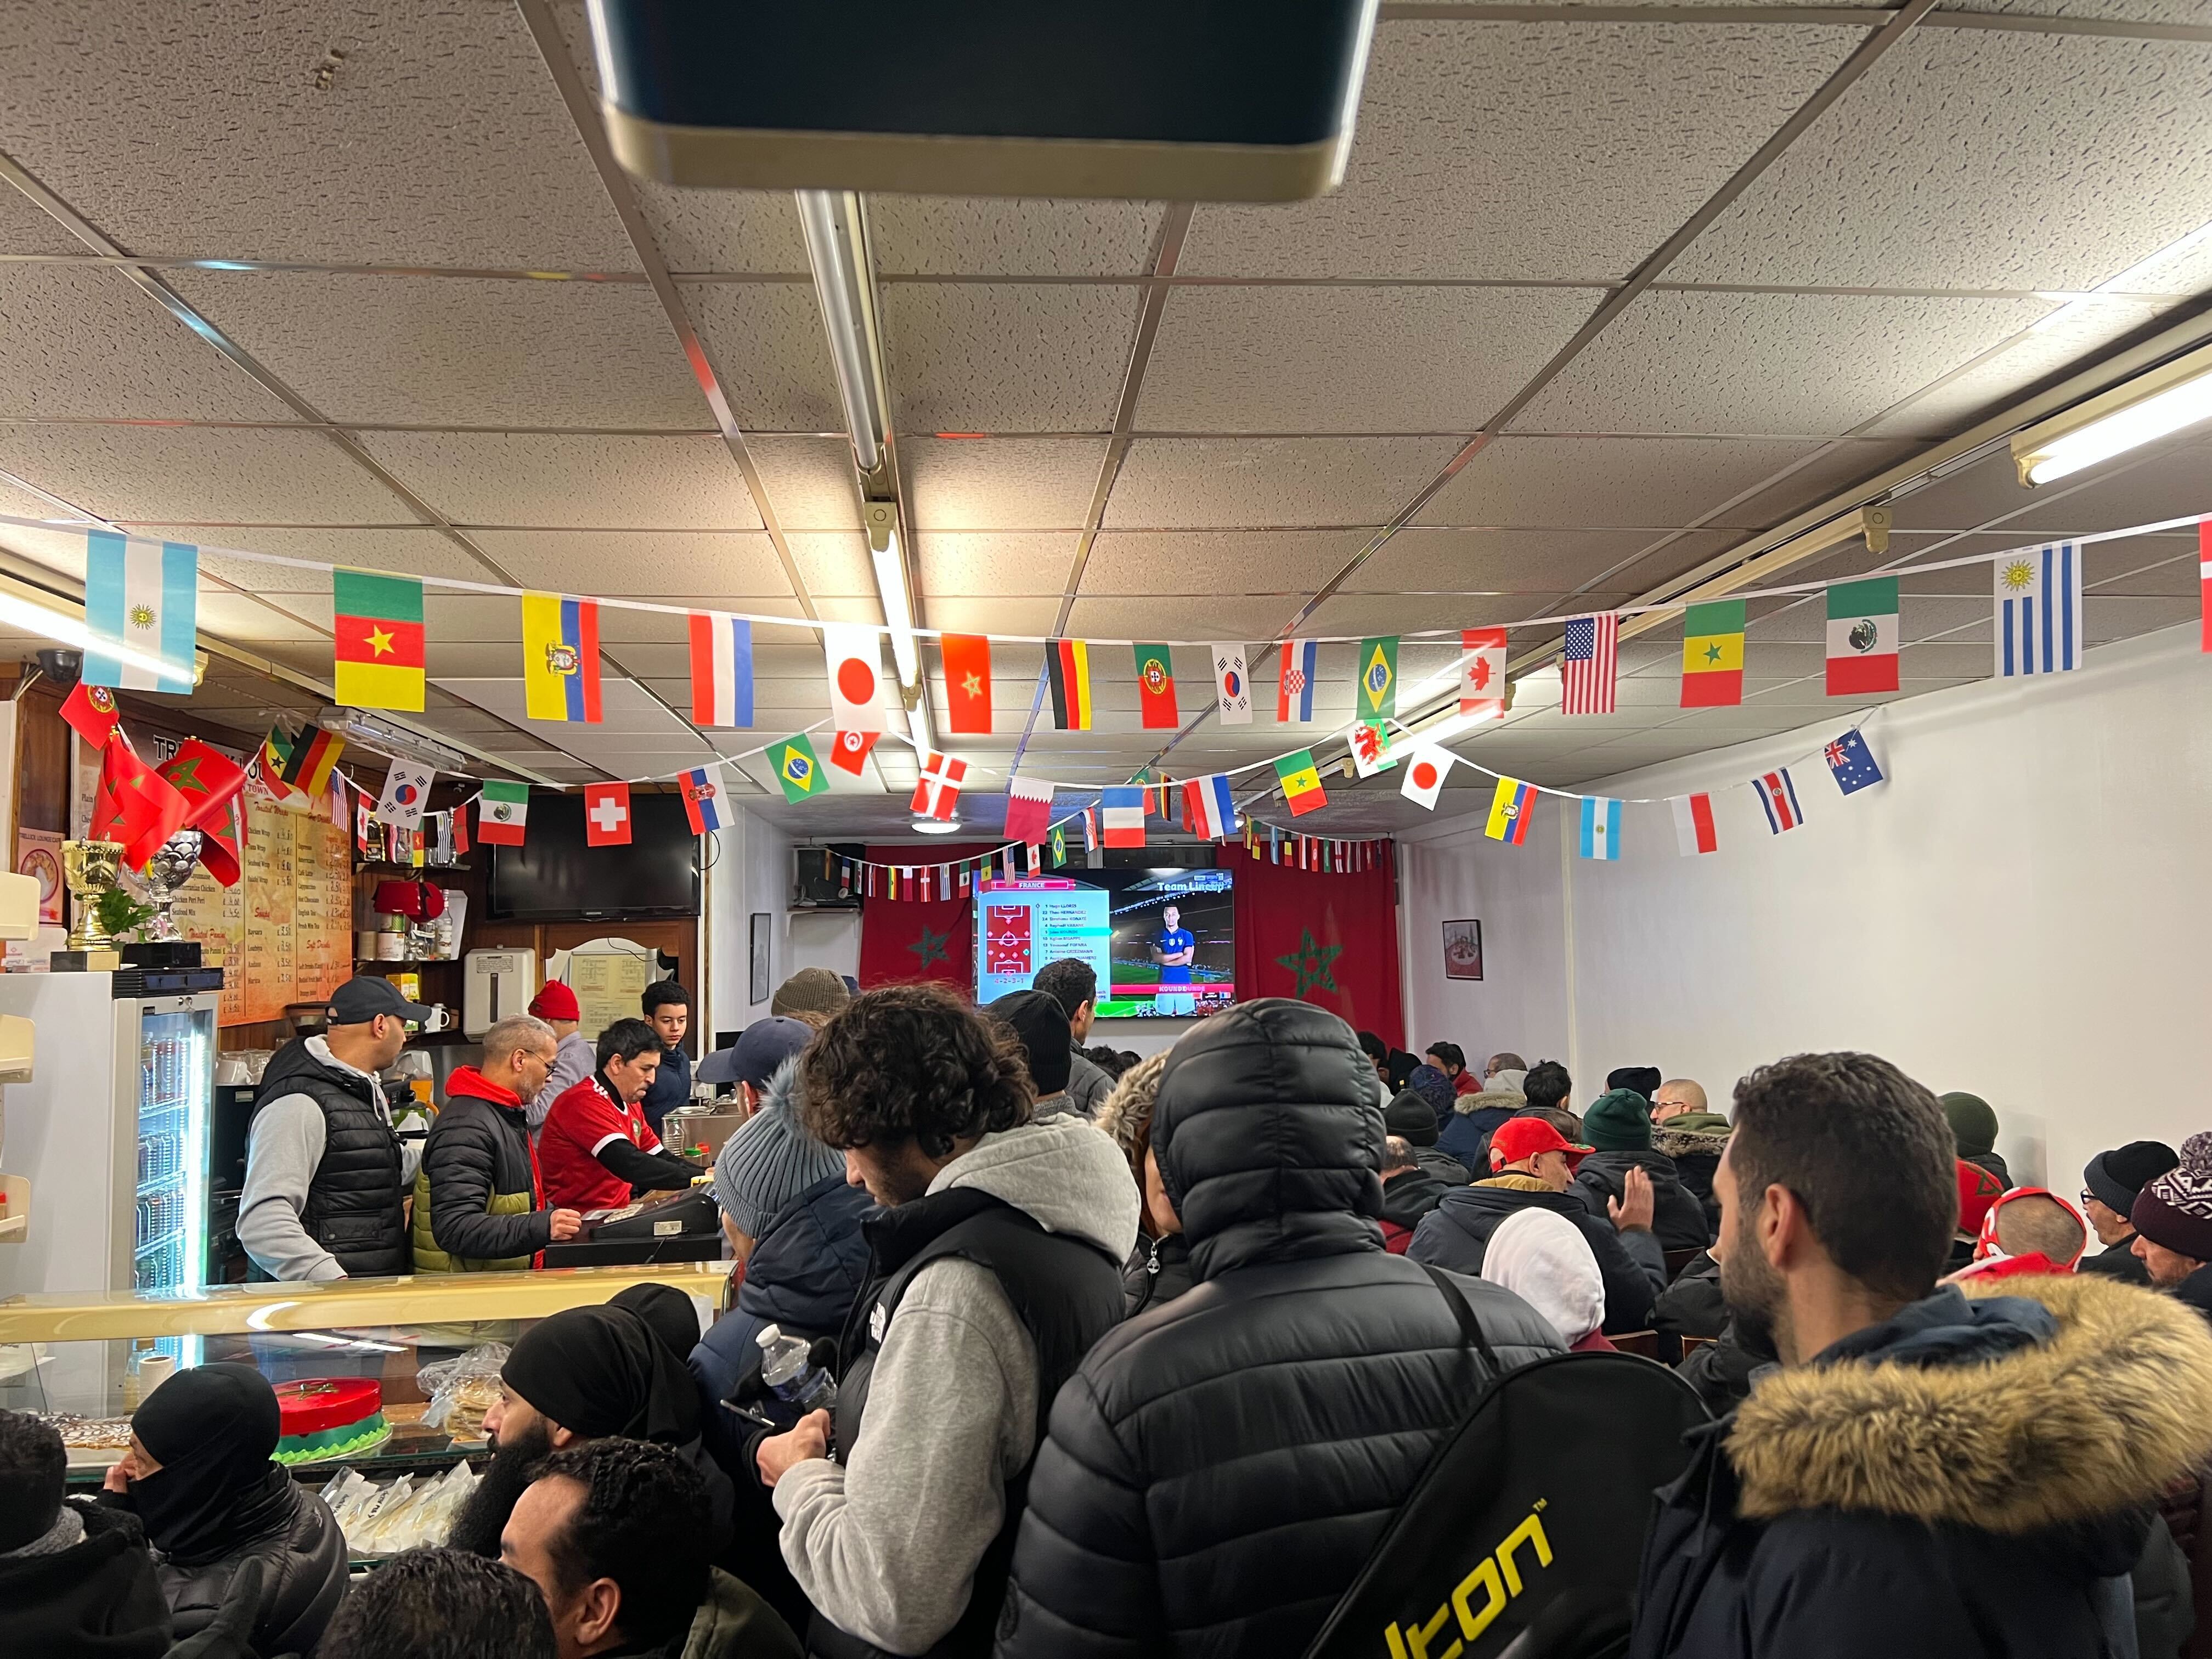 Crowds gathered inside the Trellick lounge as Moroccan fans geared up for the World Cup semi-final (MEE/Areeb Ullah)